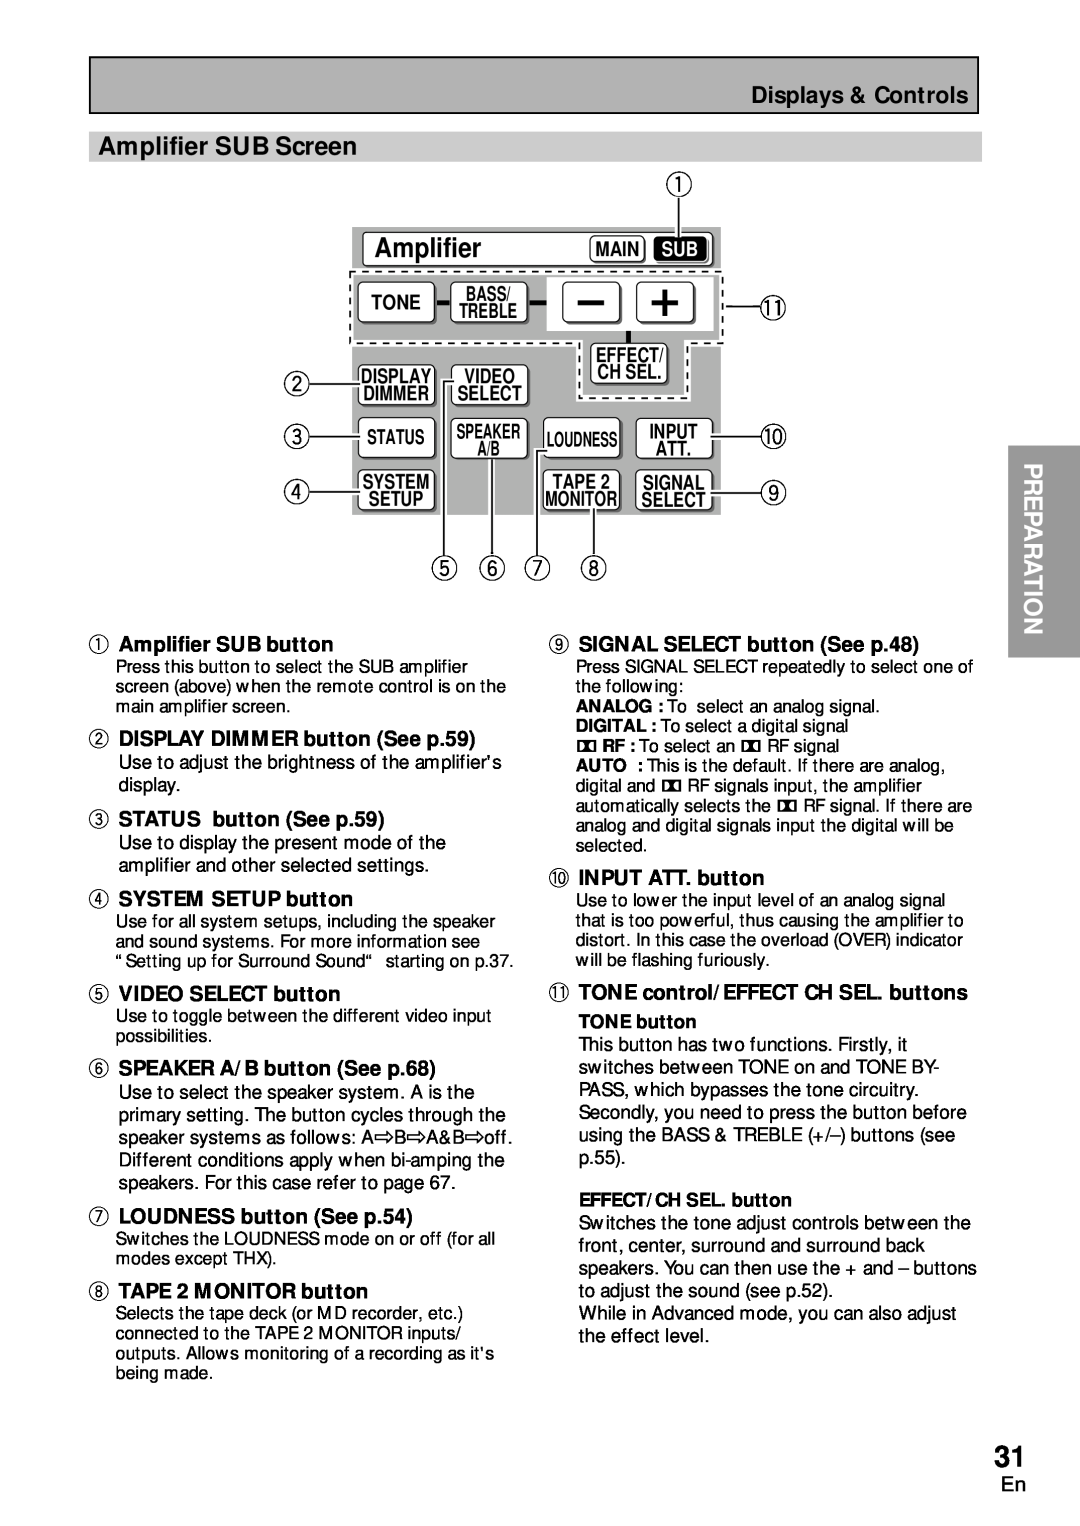 Pioneer VSA-AX10 operating instructions 5 6 7, Amplifier SUB Screen, Preparation, Effect, Ch Sel 